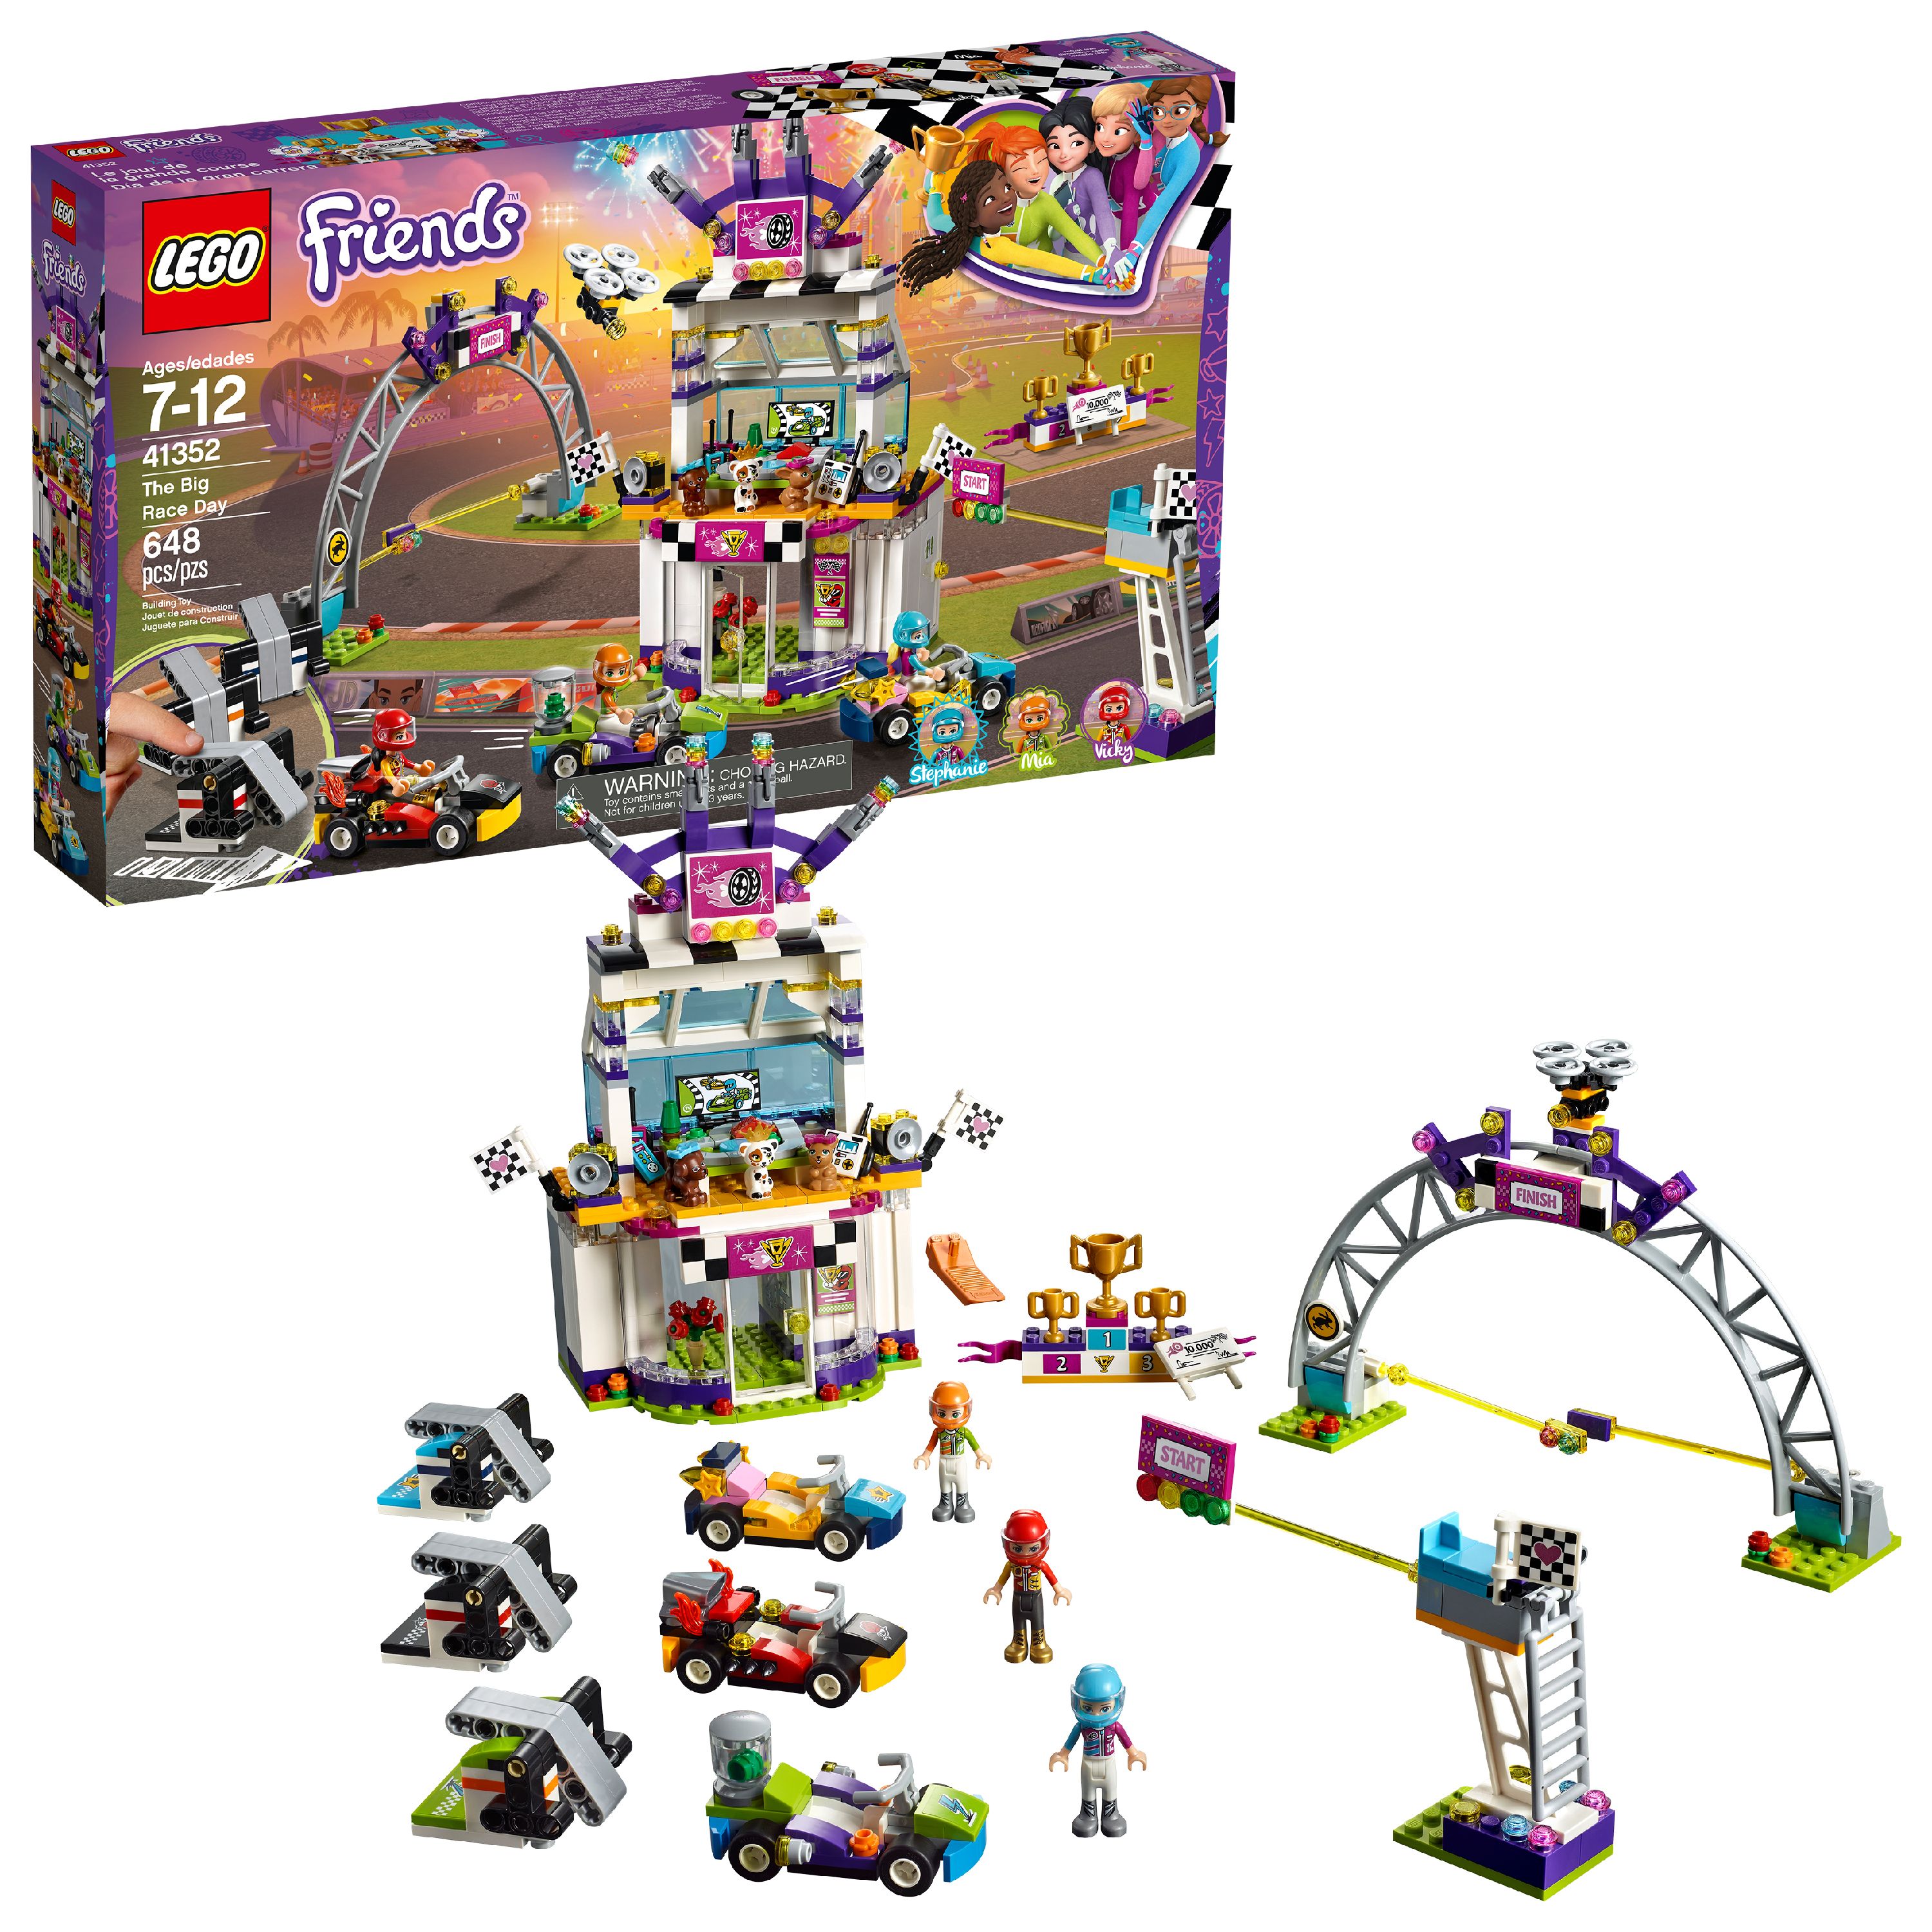 LEGO Friends The Big Race Day 41352 - image 1 of 7